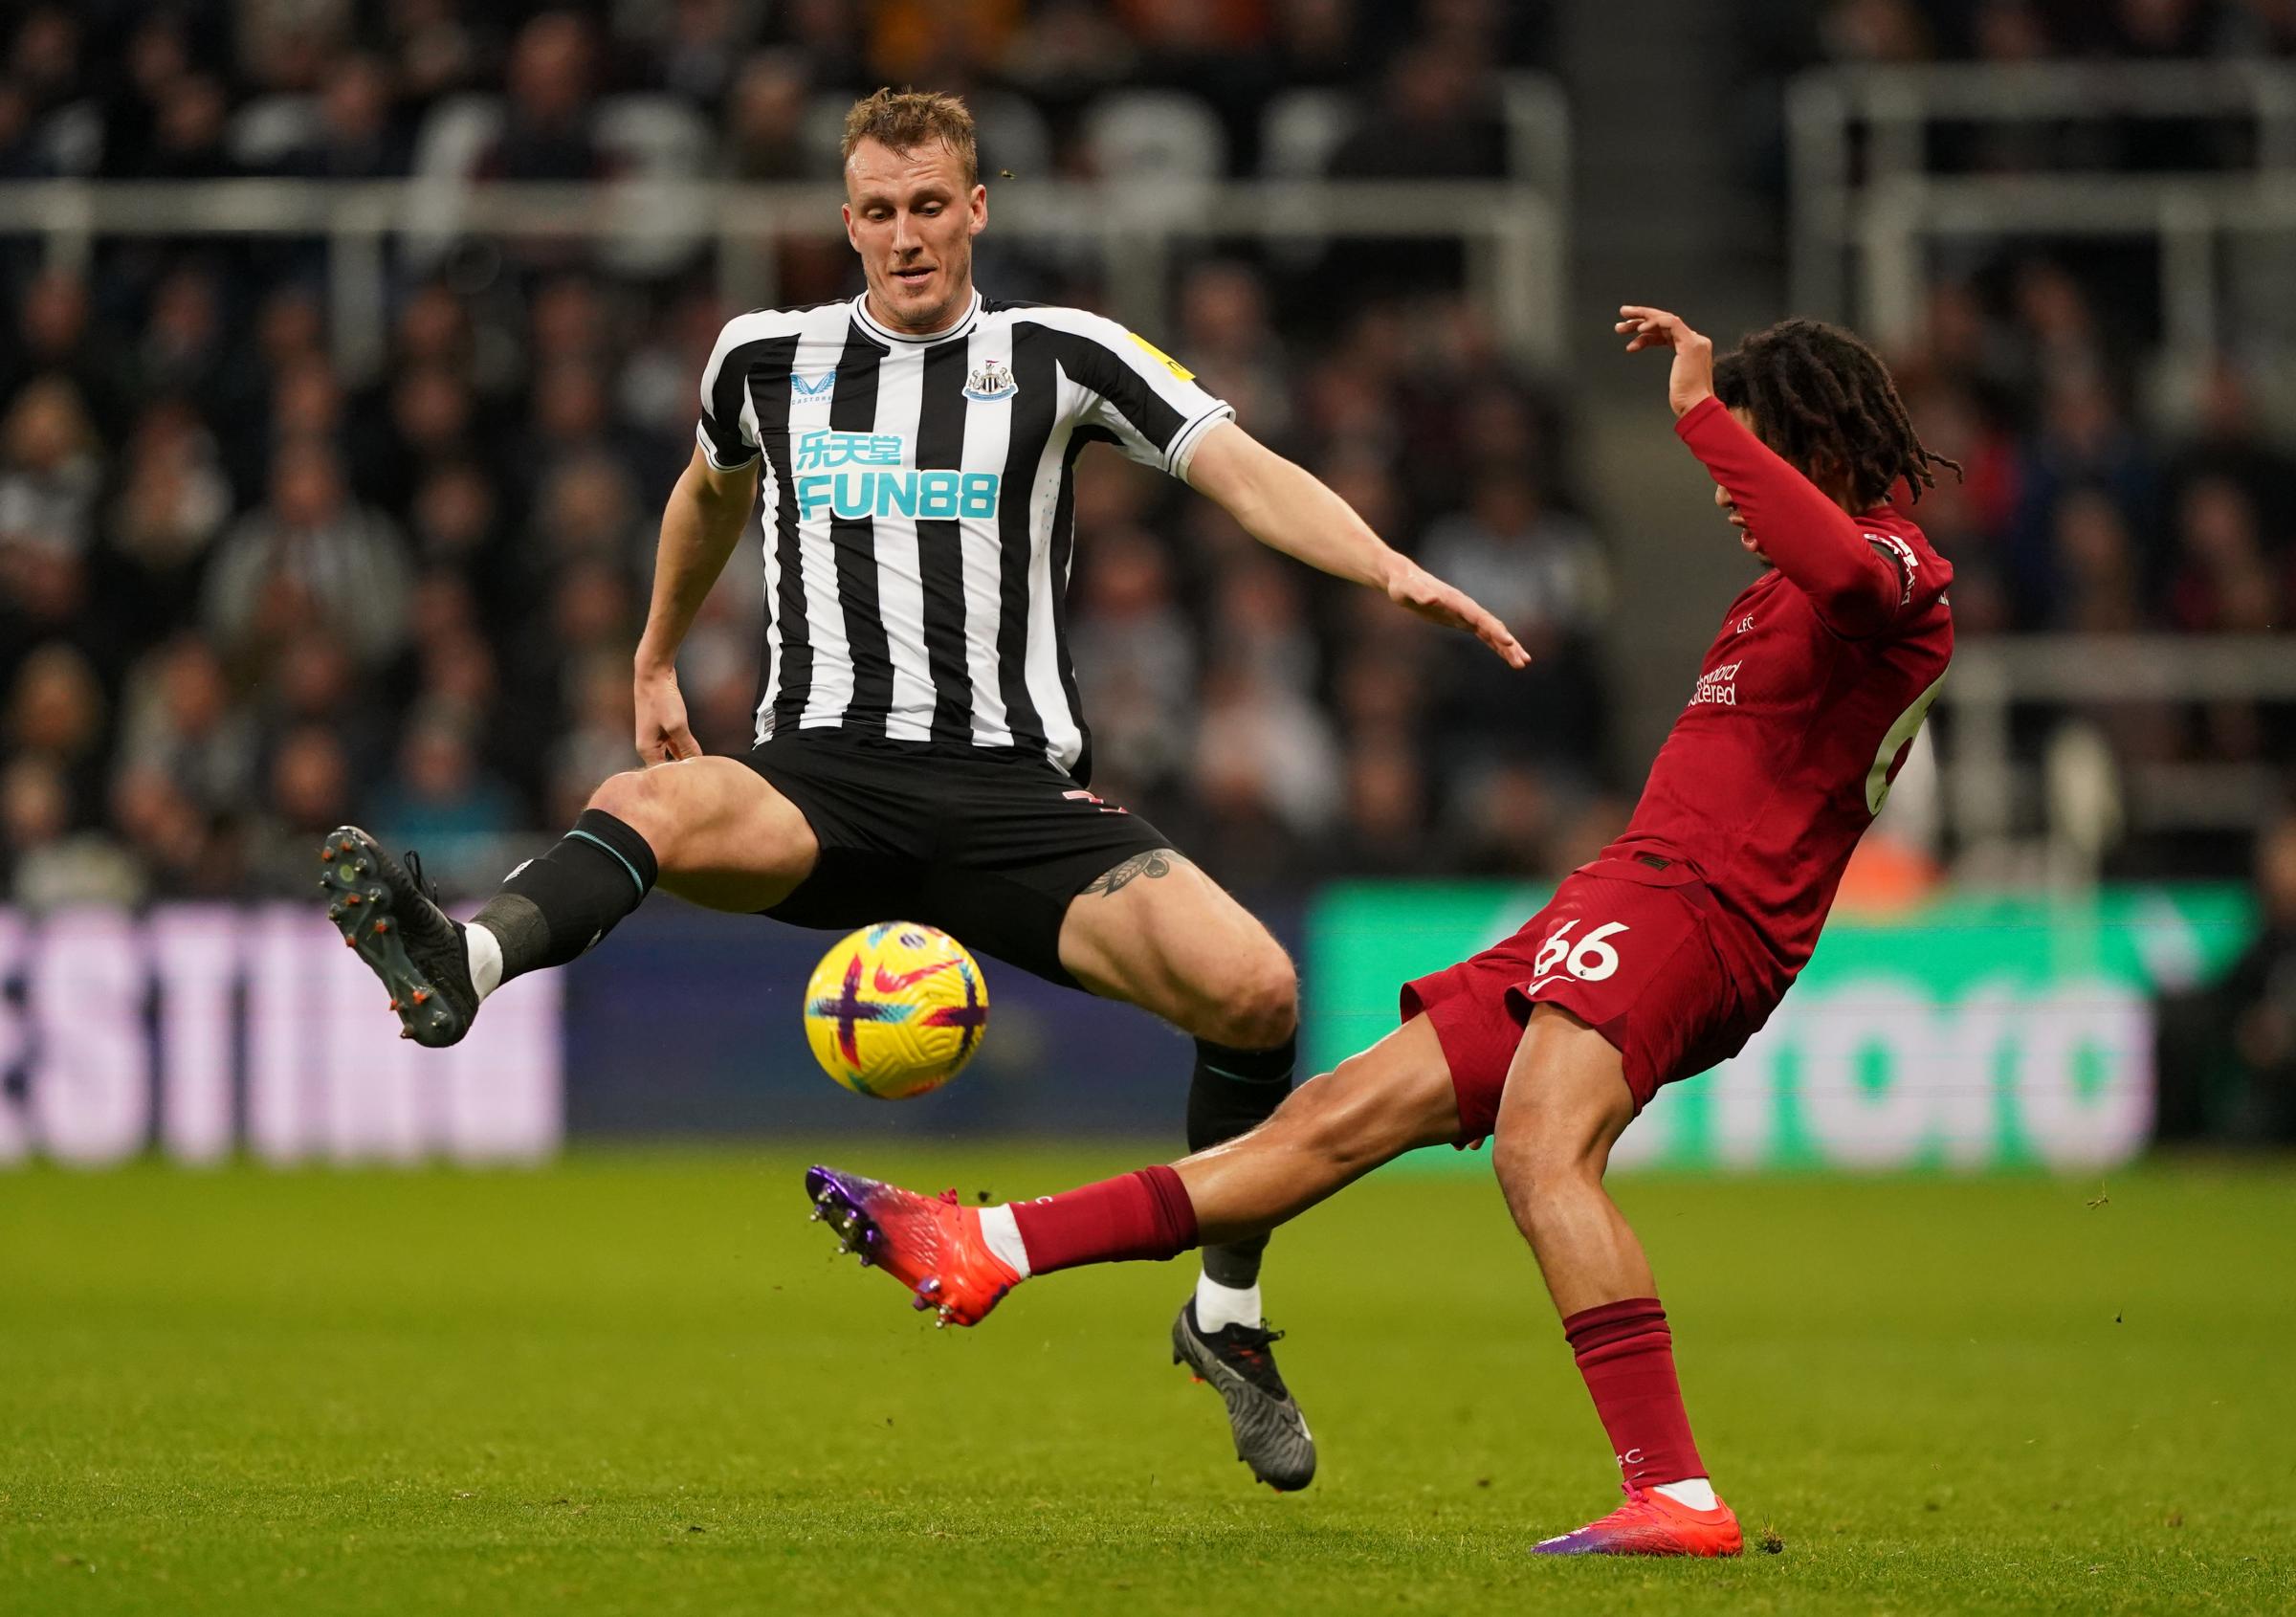 Match Ratings: Newcastle United 0 Liverpool 2 - Alisson is star player